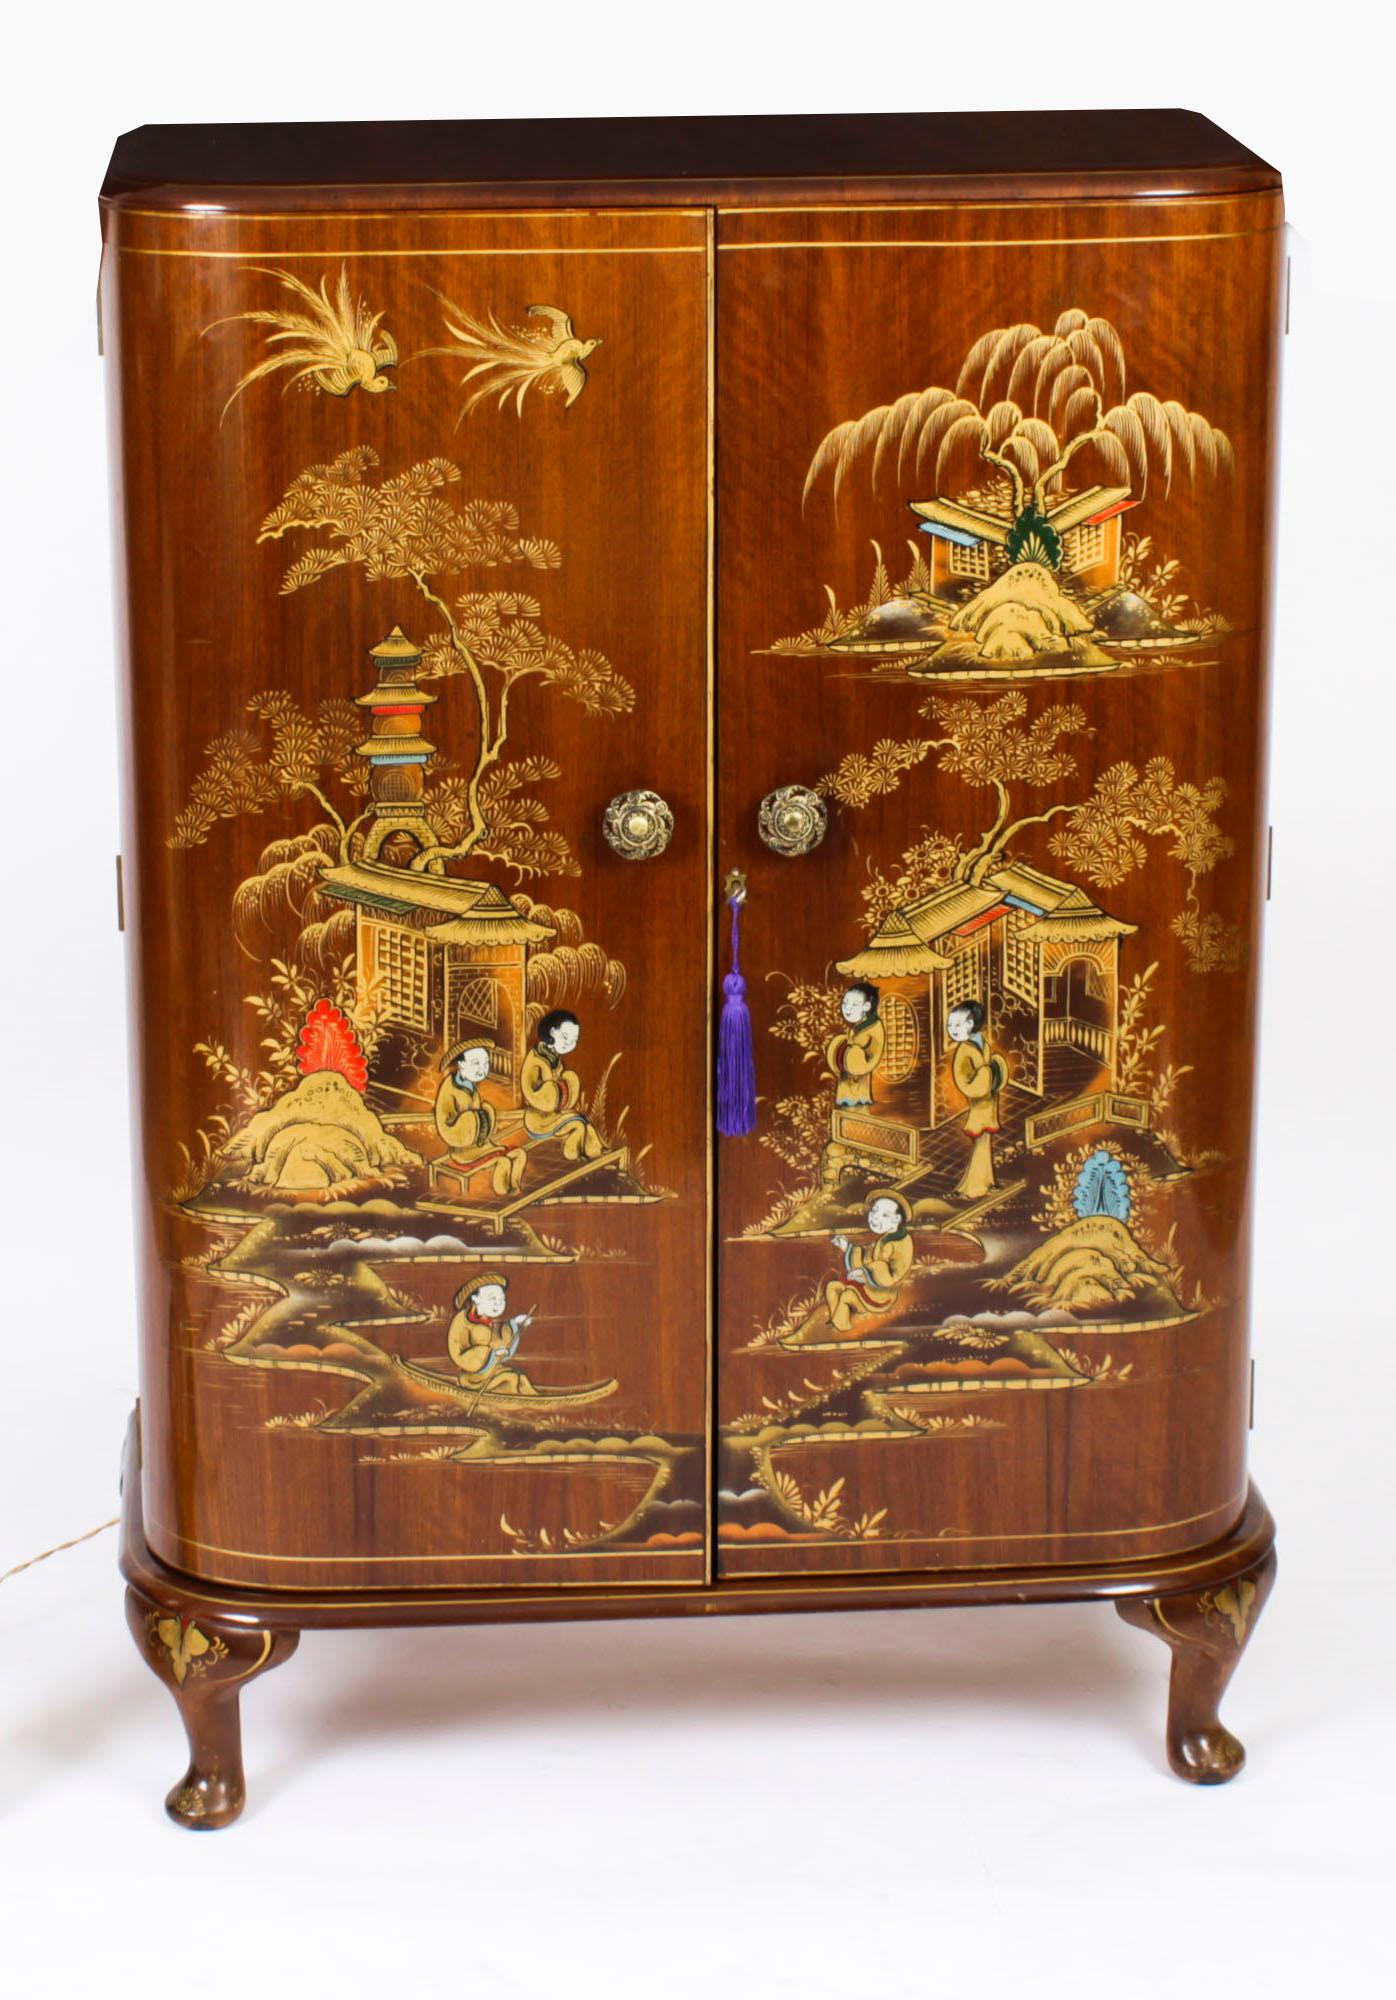 This is a fantastic antique Art Deco walnut cocktail cabinet with Chinoiserie lacquered decoration by Frank Hudson & Sons for Harrods,  circa 1920 in date.
 
The fitted twin doors opens to reveal a mirrored interior decorated with three shelves and